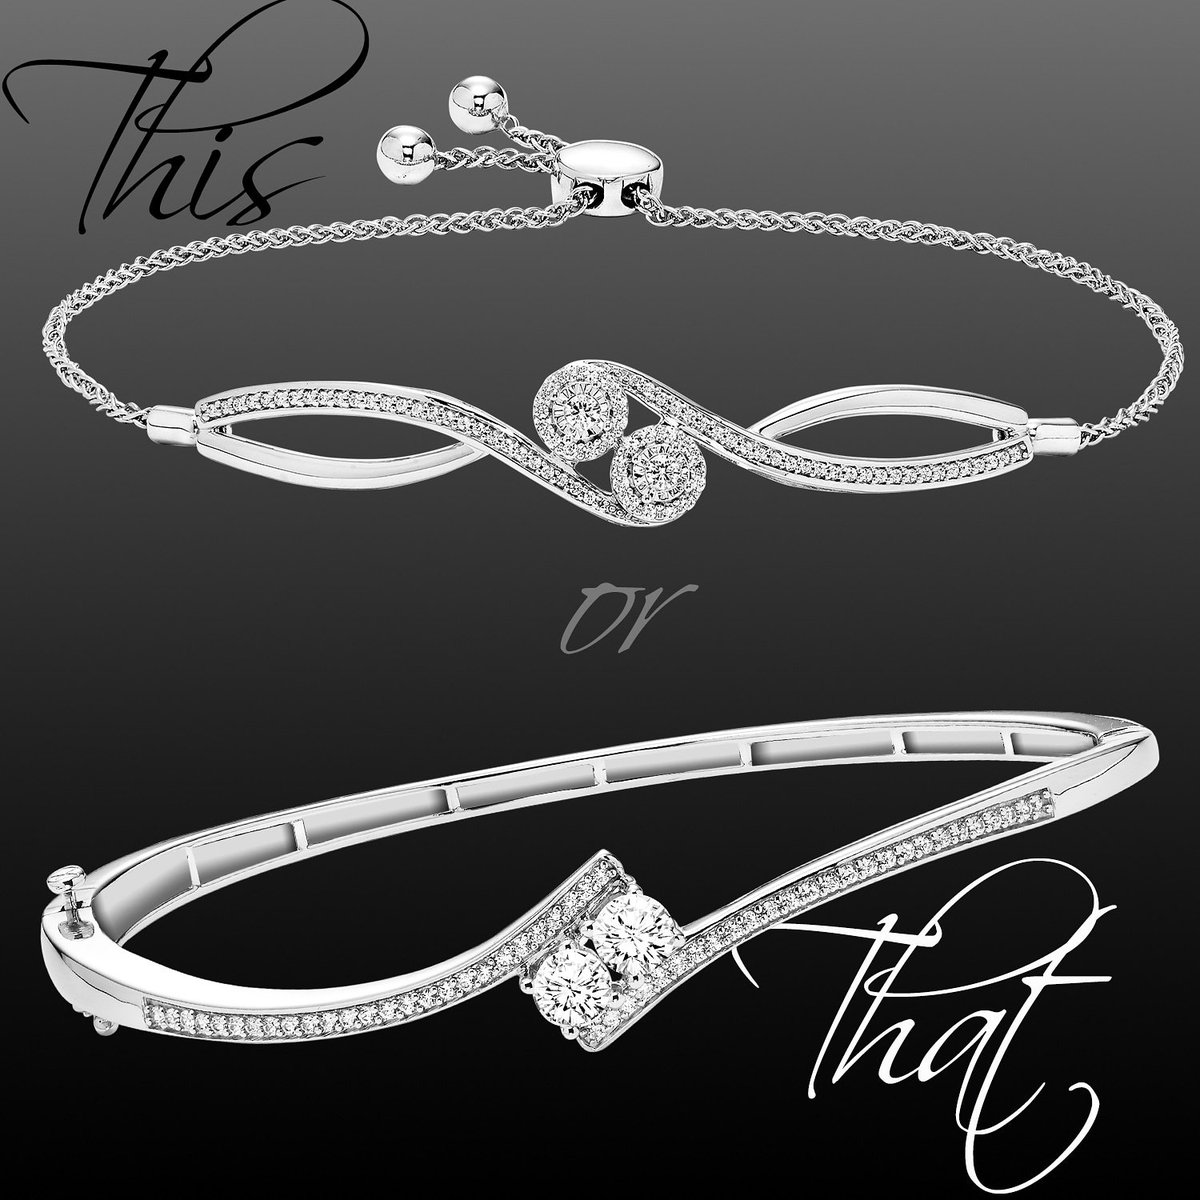 Here is some bracelet bling for you to love. Which would you pick? This or That?
#thisorthat #bracelets #diamonds #diamondbracelet #bling #giftsforher #wristcandy #jewelleryforher #jewellerydesigns #jewellery #braceletstyle